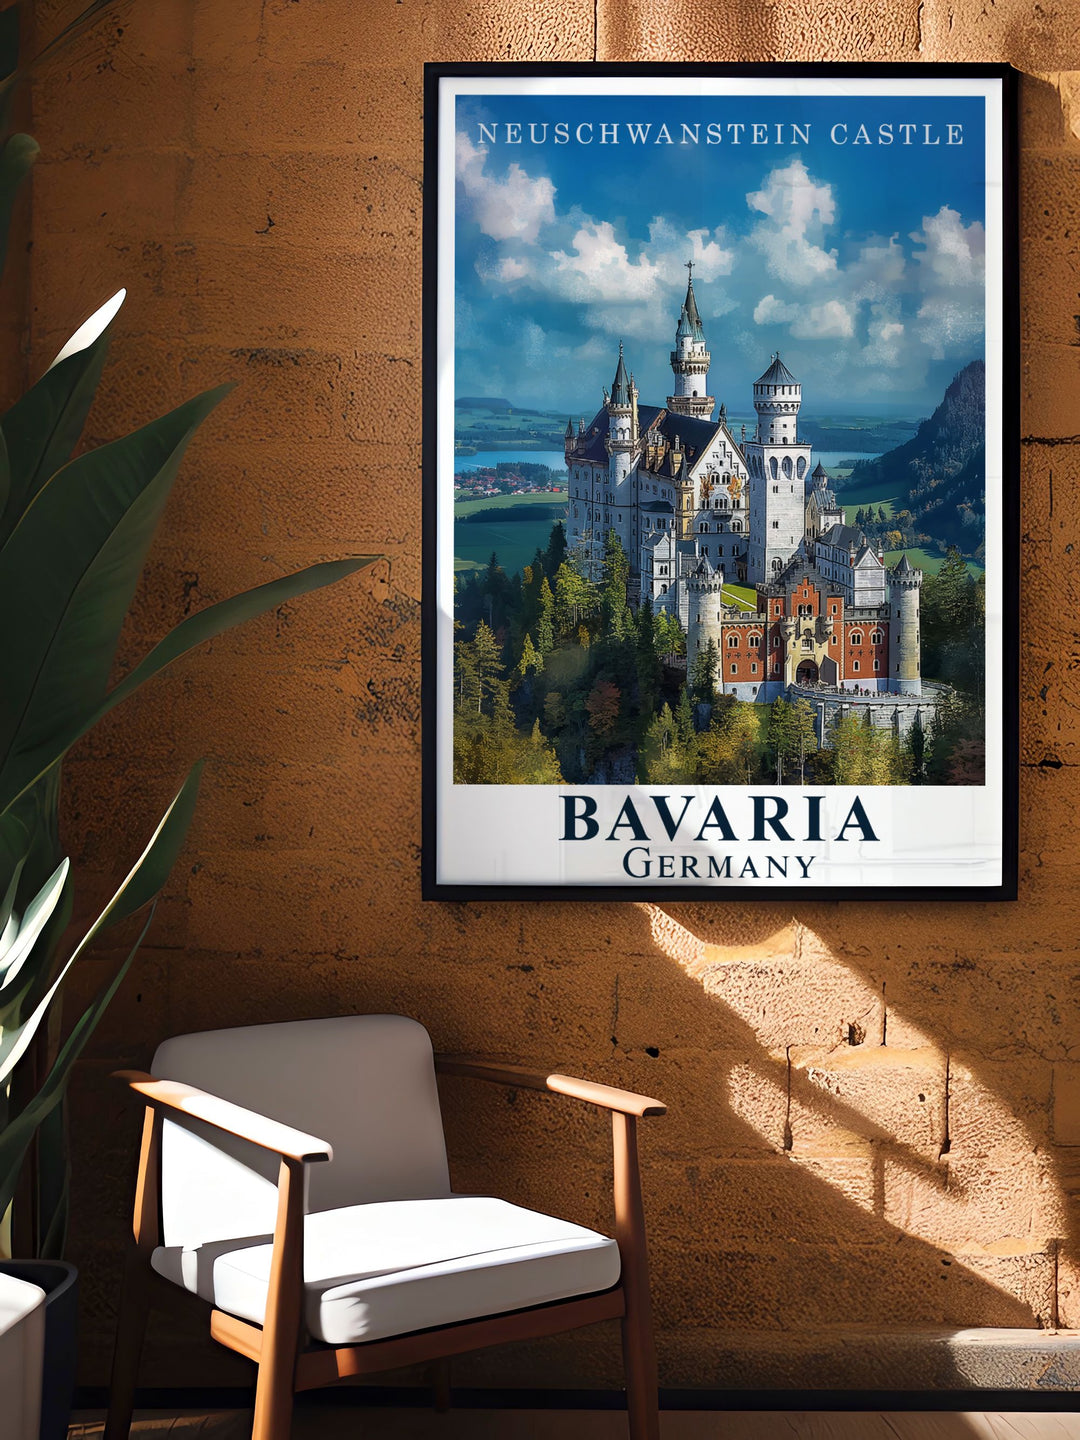 Neuschwanstein Castle vintage print adding a nostalgic flair to your decor. Perfect for those who cherish the charm of yesteryears this art piece blends history and beauty seamlessly.